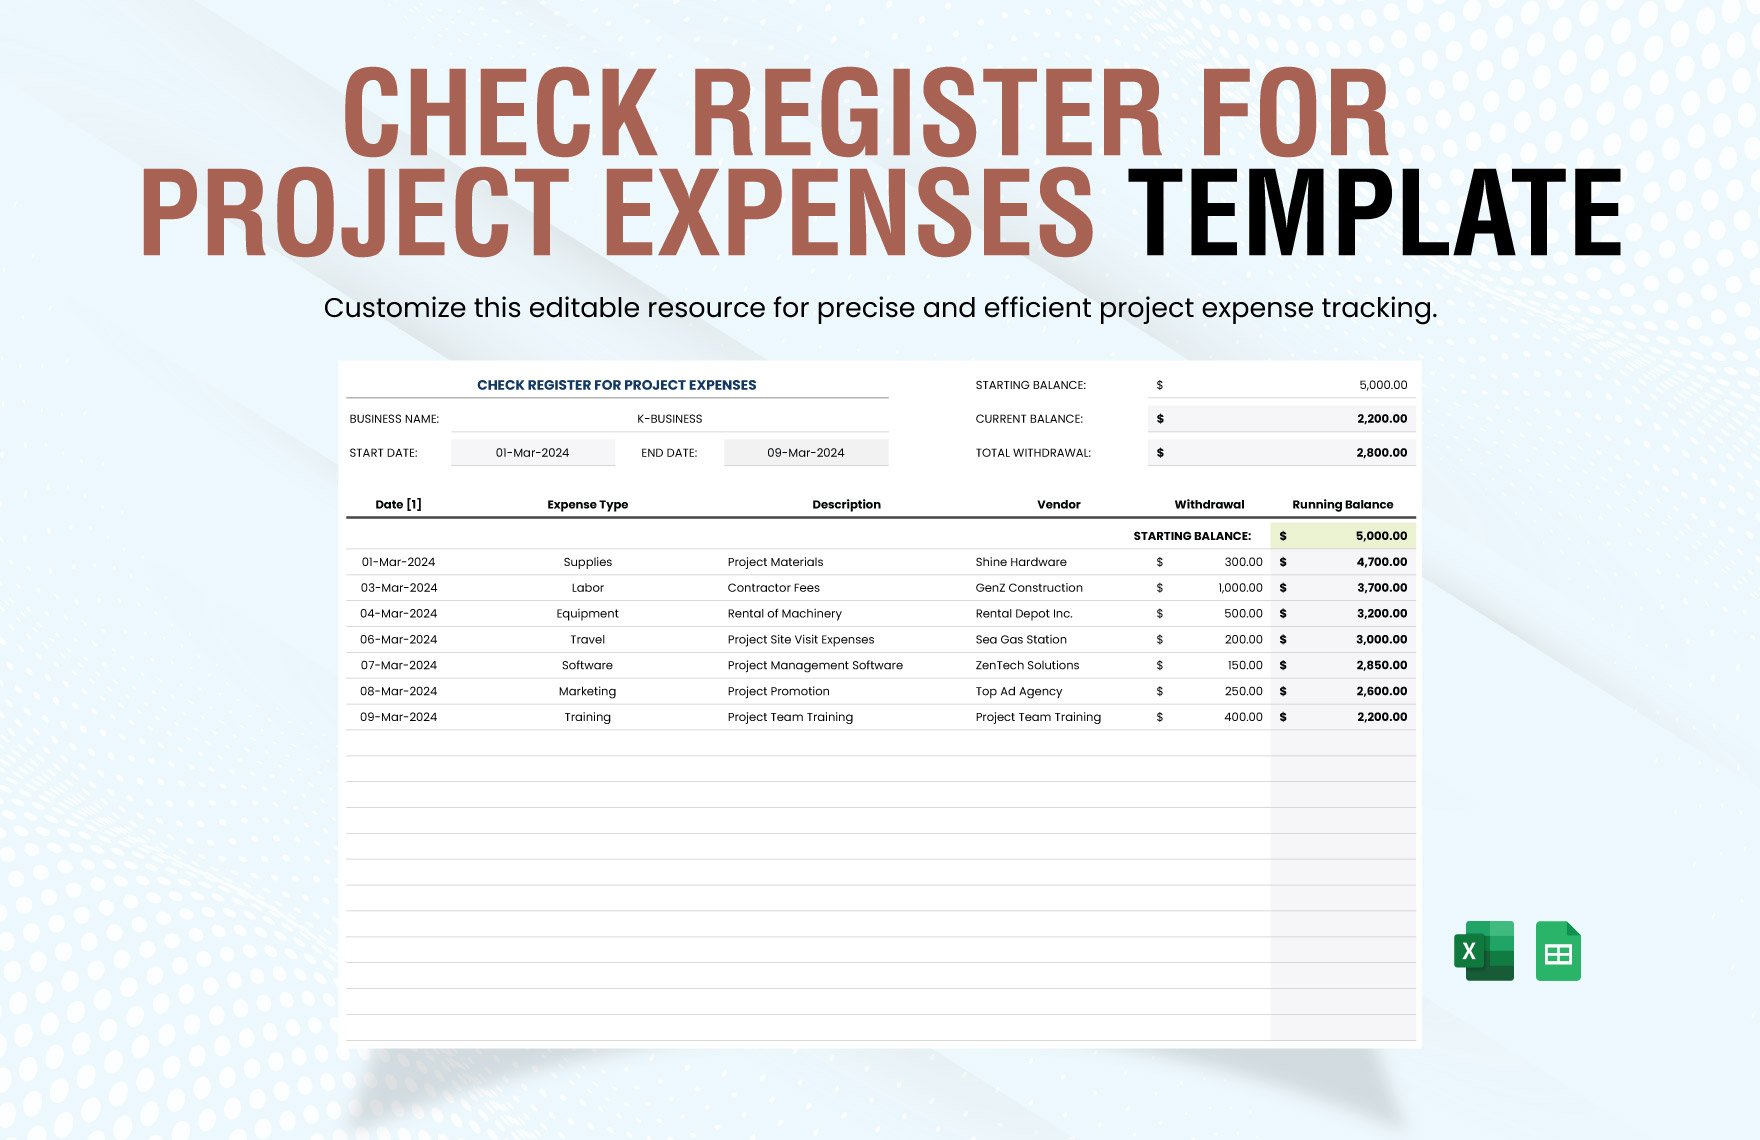 Check Register for Project Expenses Template in Excel, Google Sheets